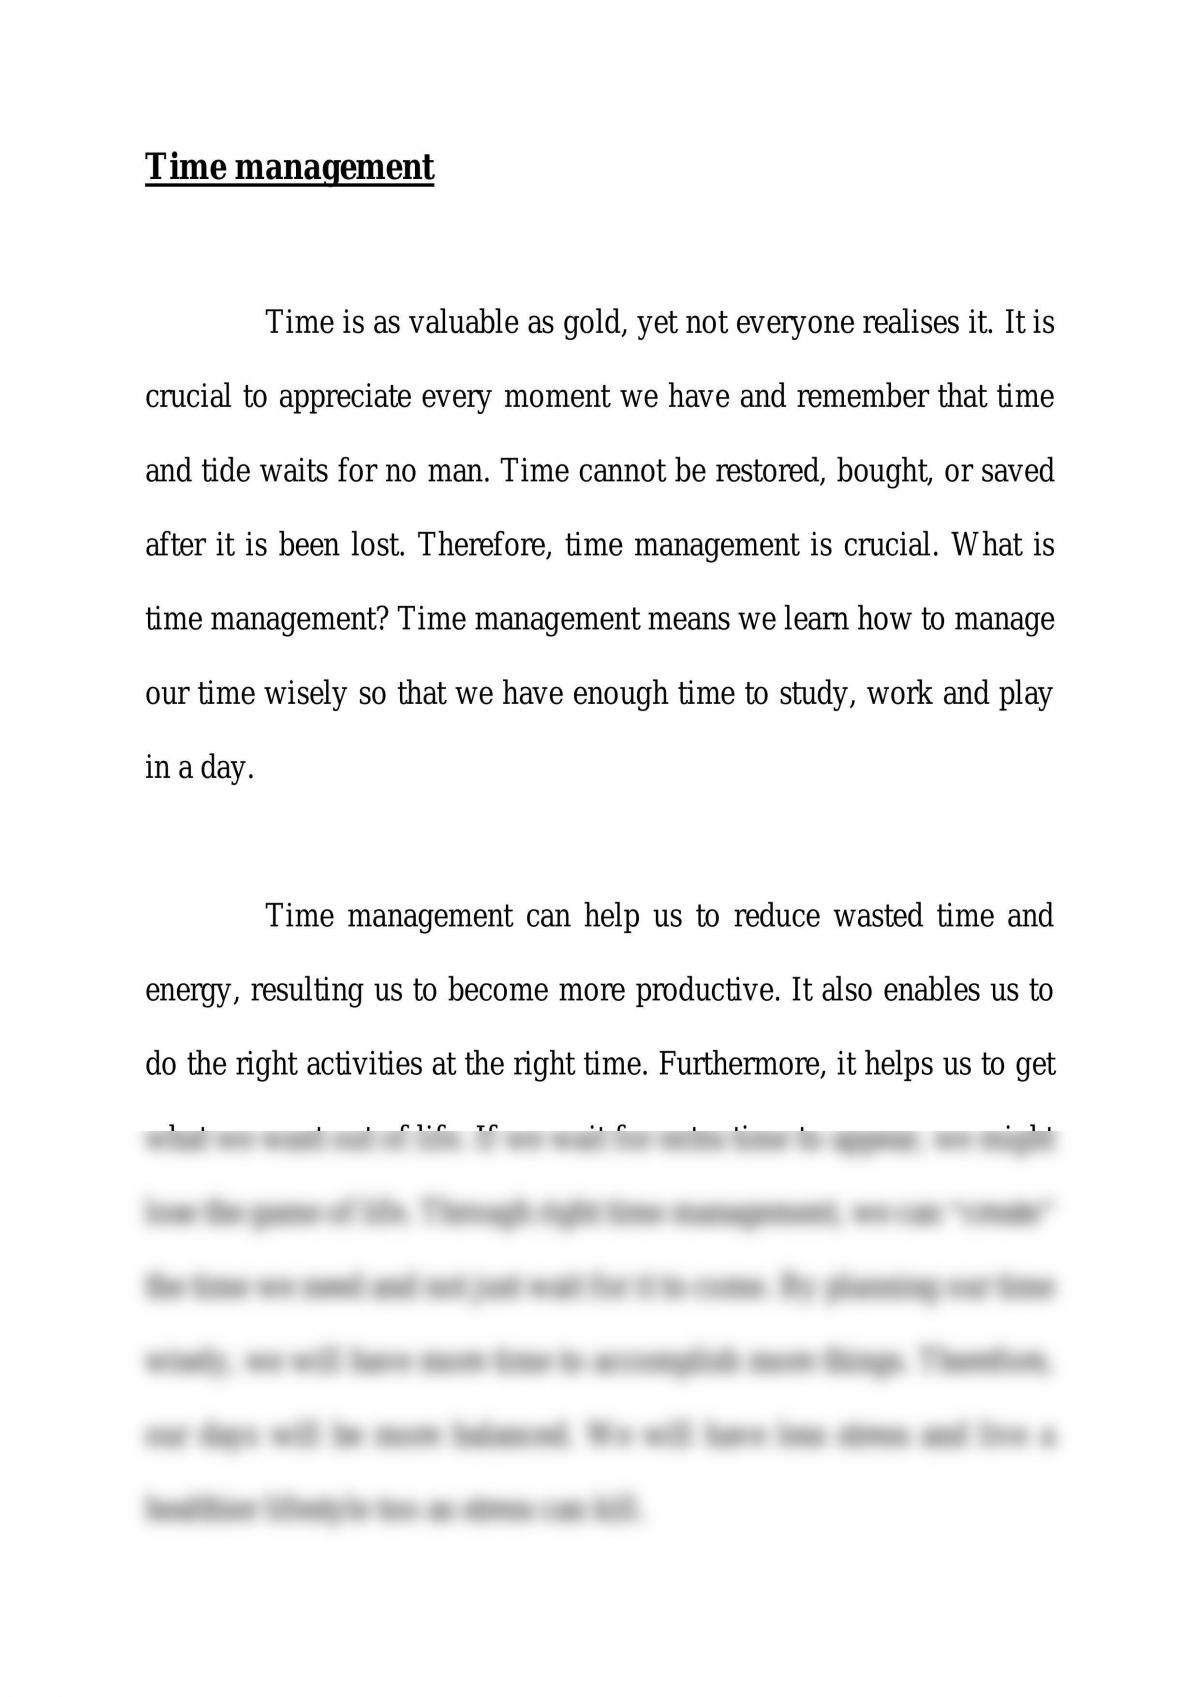 time management essay wikipedia